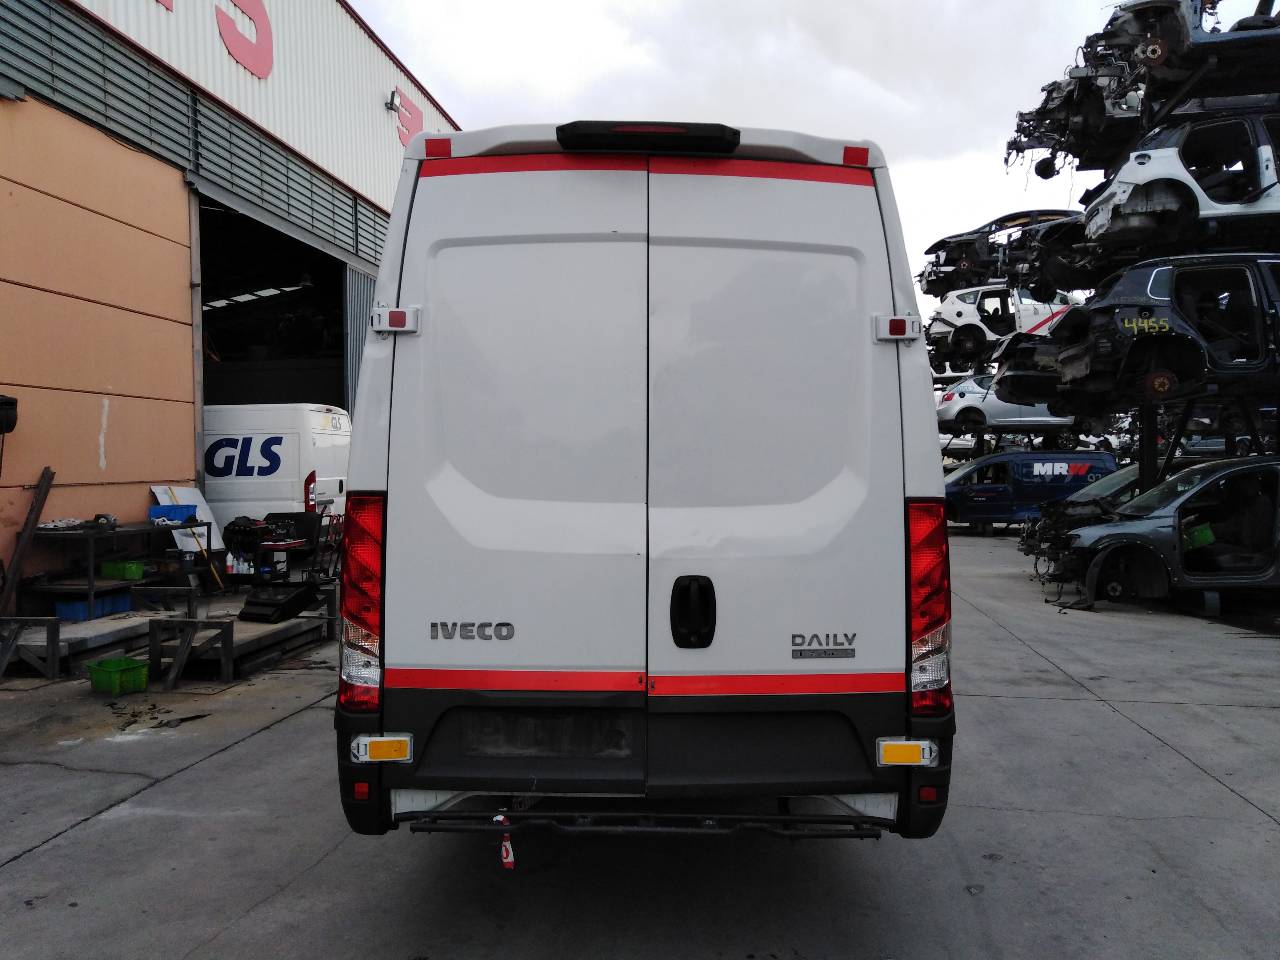 IVECO Daily ABS blokas 5802268475, P3-A8-14-2 24075793